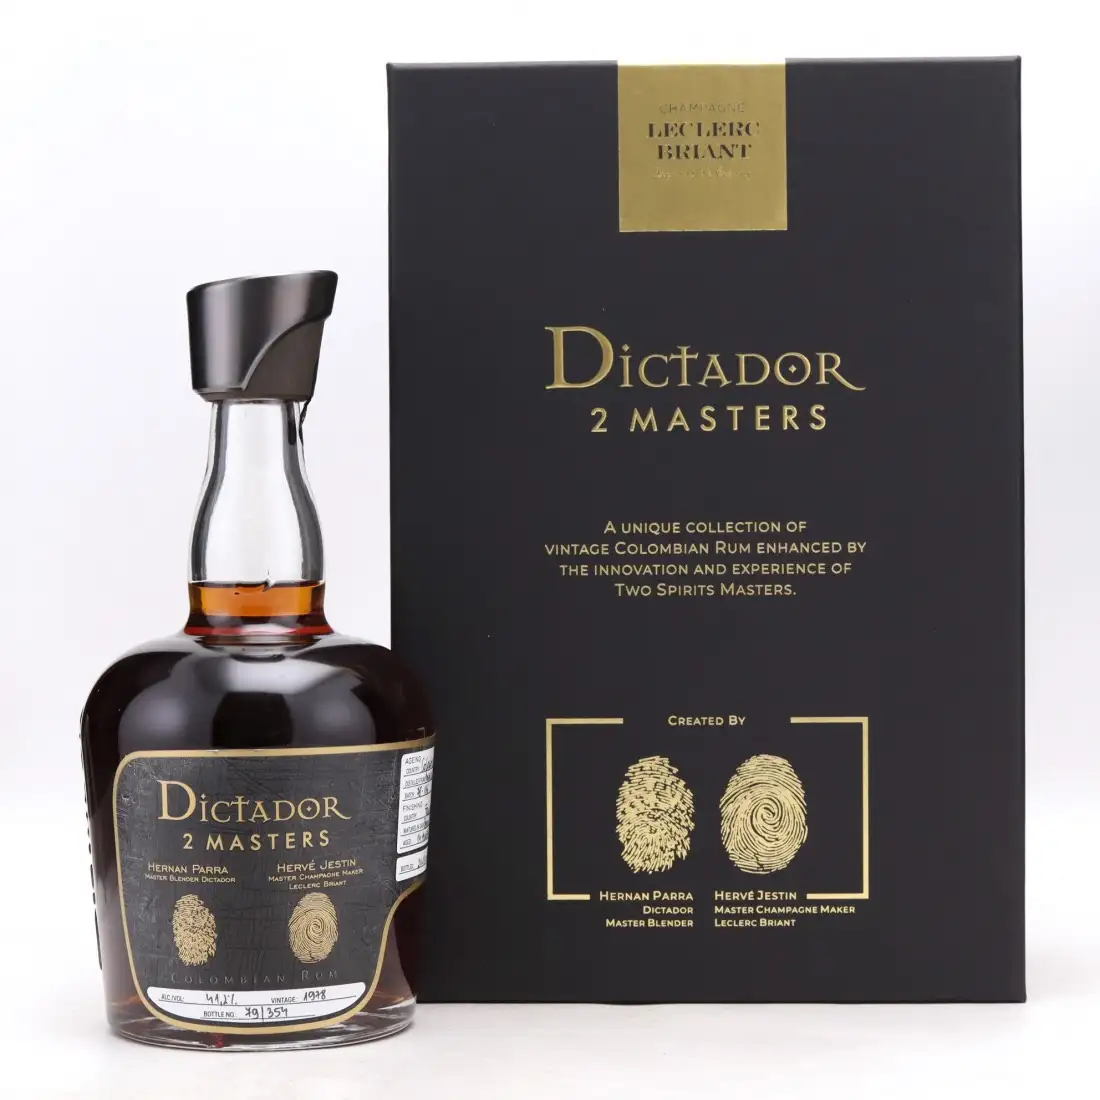 Image of the front of the bottle of the rum Dictador 2 Masters Leclerc Briant